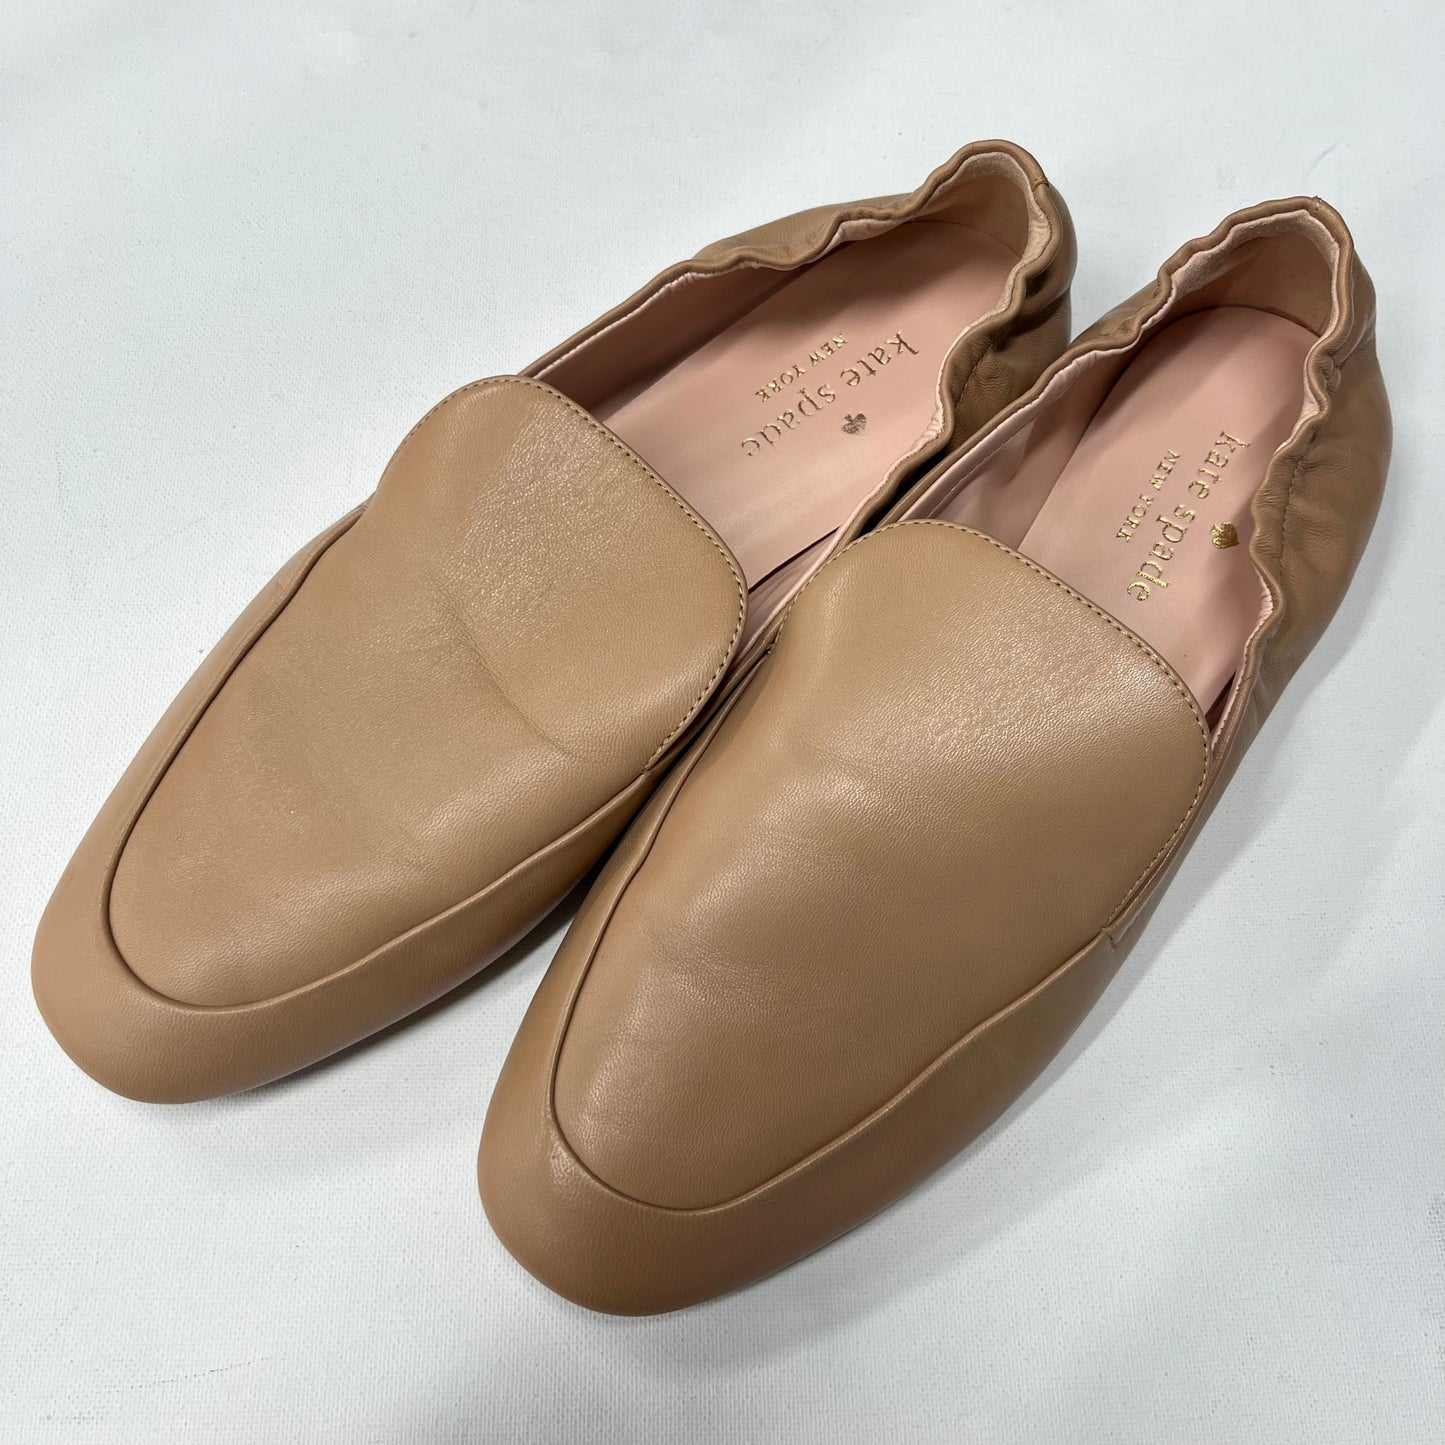 Shoes Flats Loafer Oxford By Kate Spade  Size: 9.5